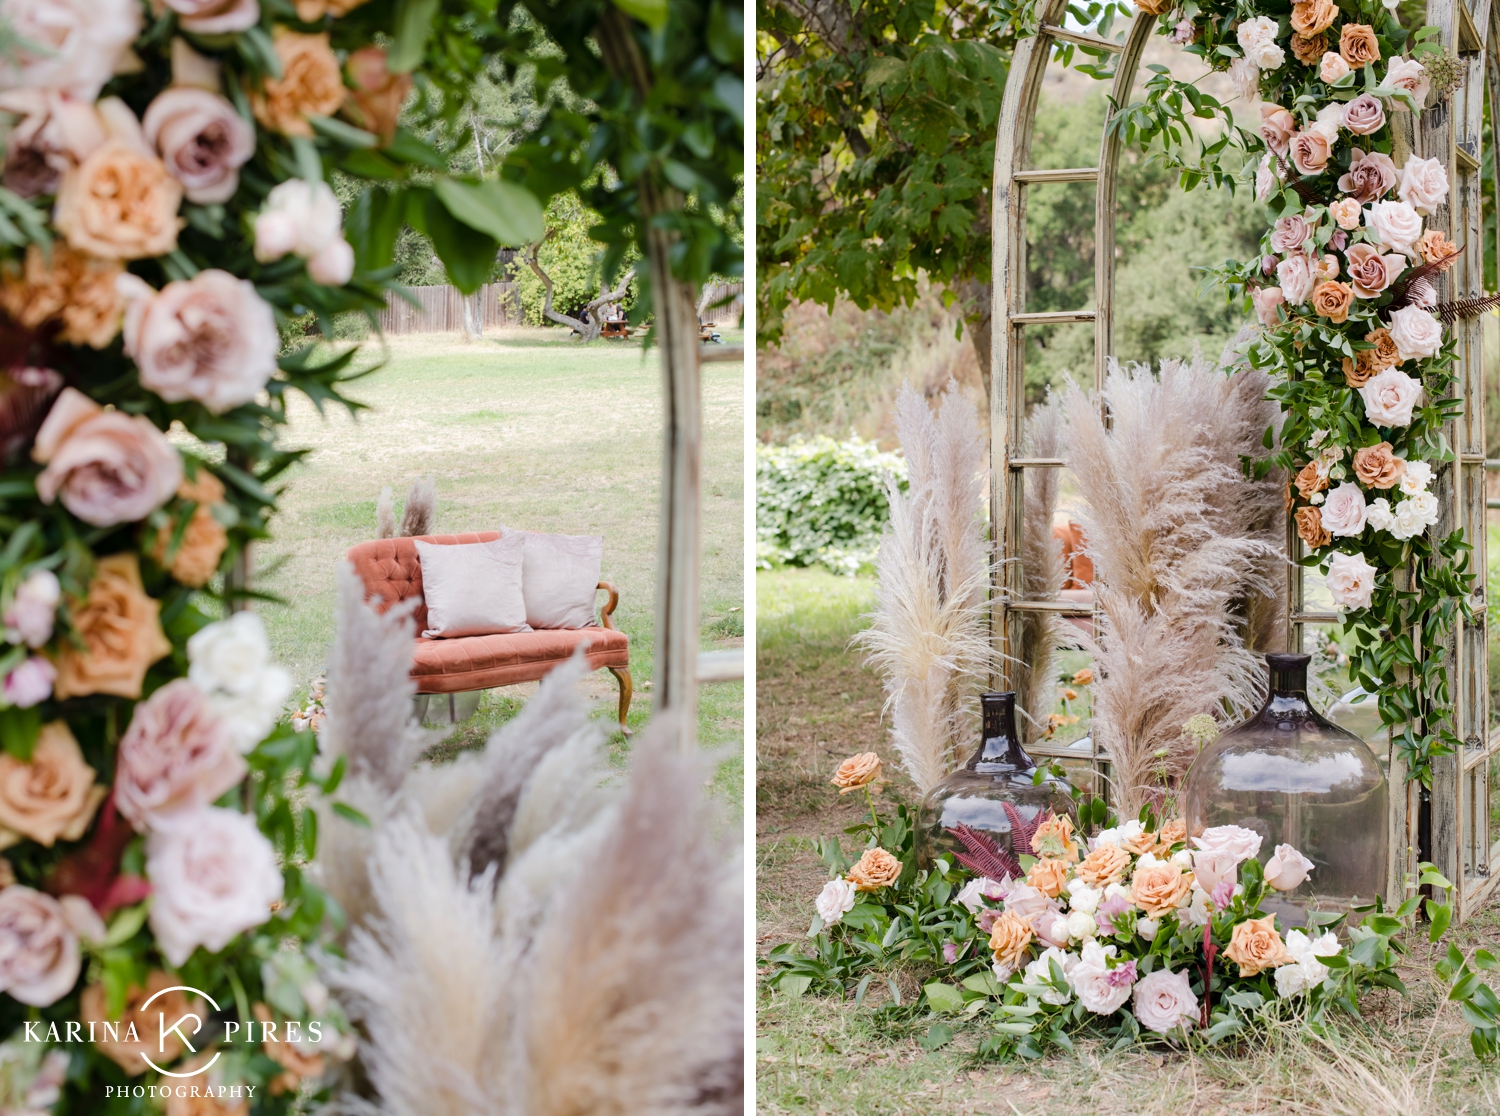 Intimate elopement featured on Inside Weddings - Planning by Yvonne Wolf Events